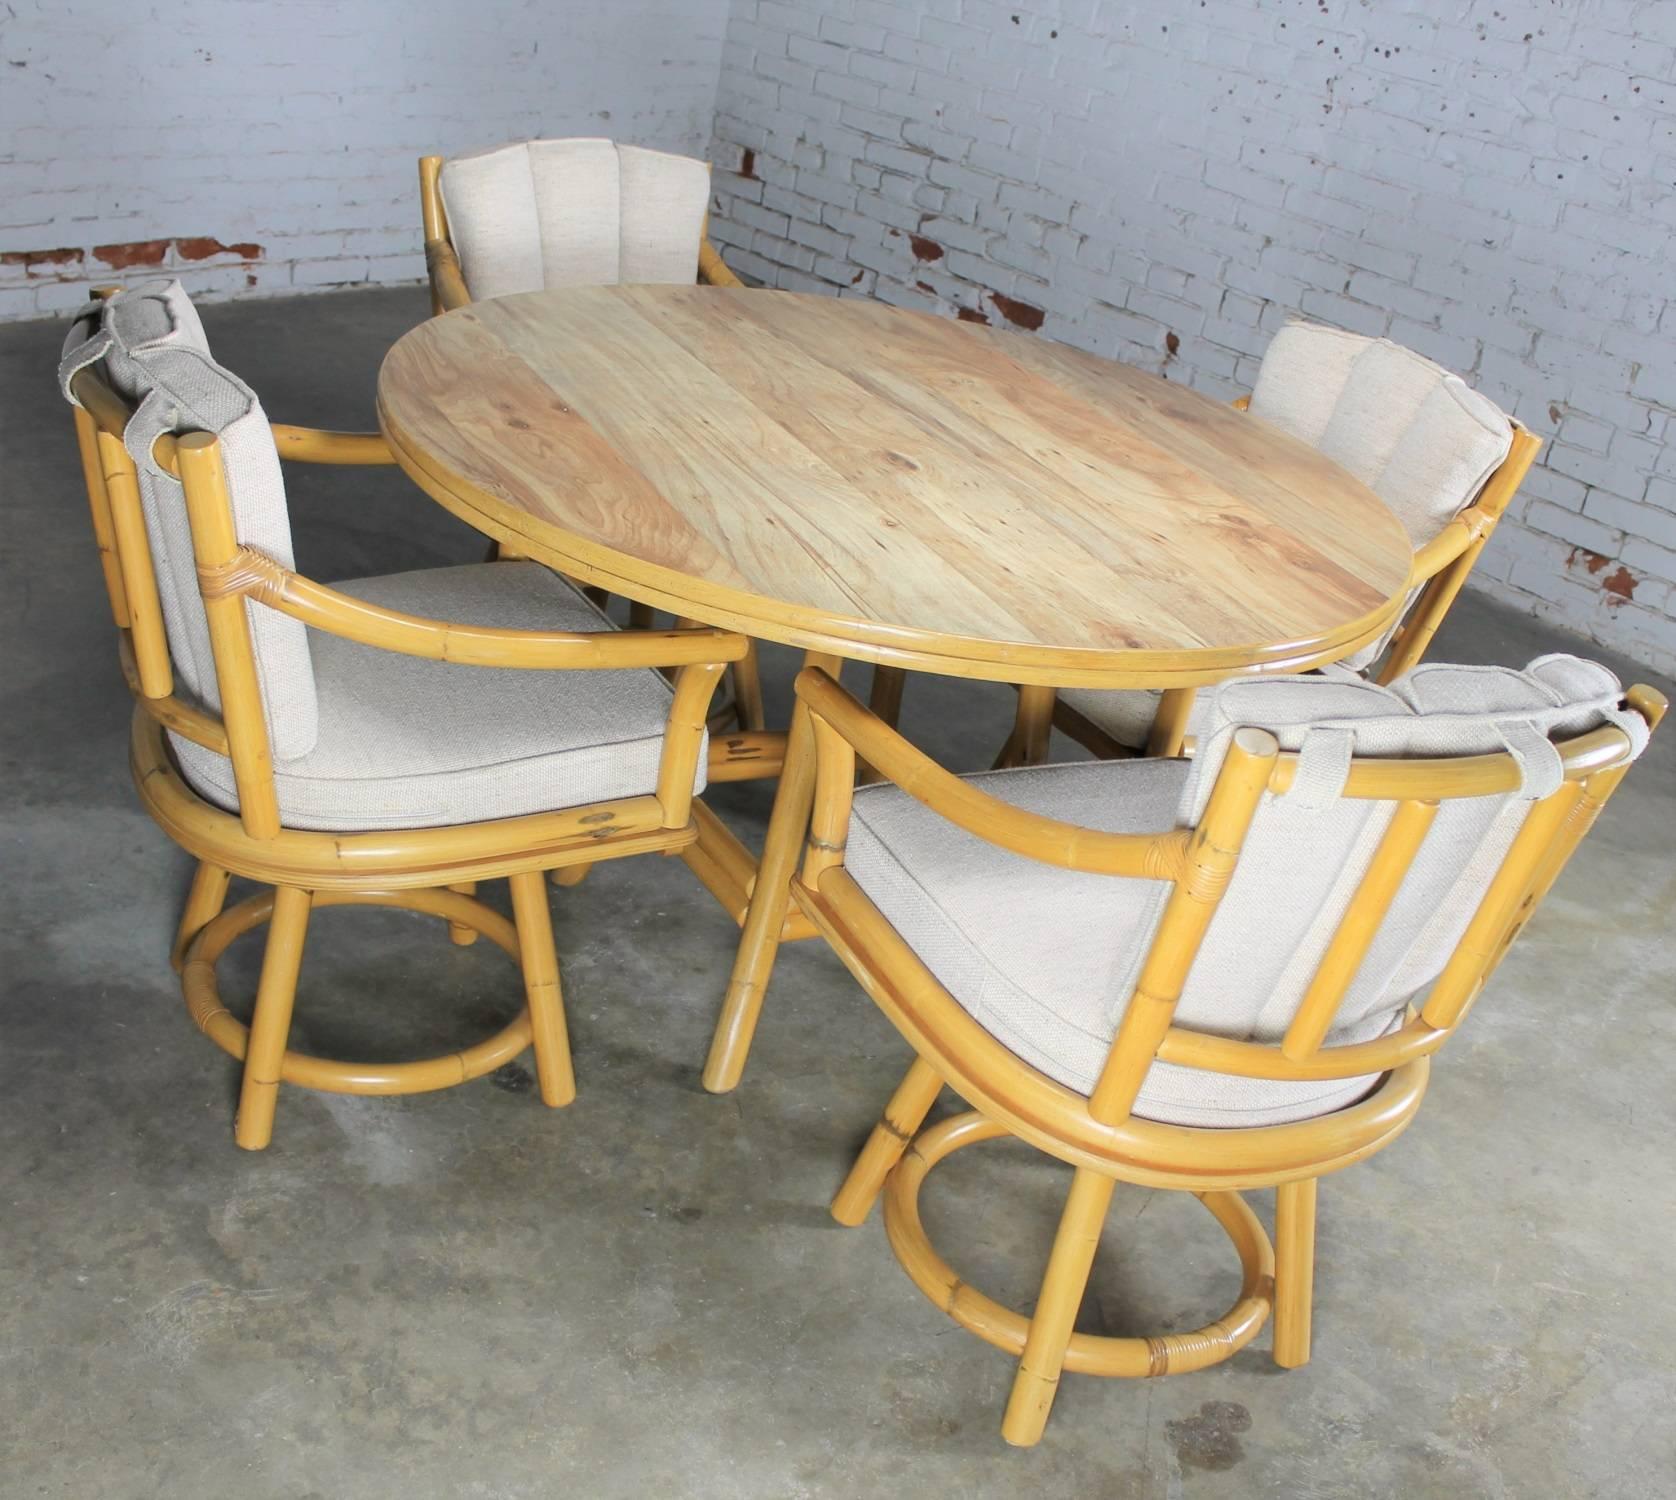 APPROVAL LISTING FOR STEPHEN ONLY.   

Perfect for your Florida room, a Mid-Century Ficks Reed Co. round game table of rattan with wood grain laminate top and four swivel armchairs of rattan with oatmeal colored hopsack fabric cushions. This awesome